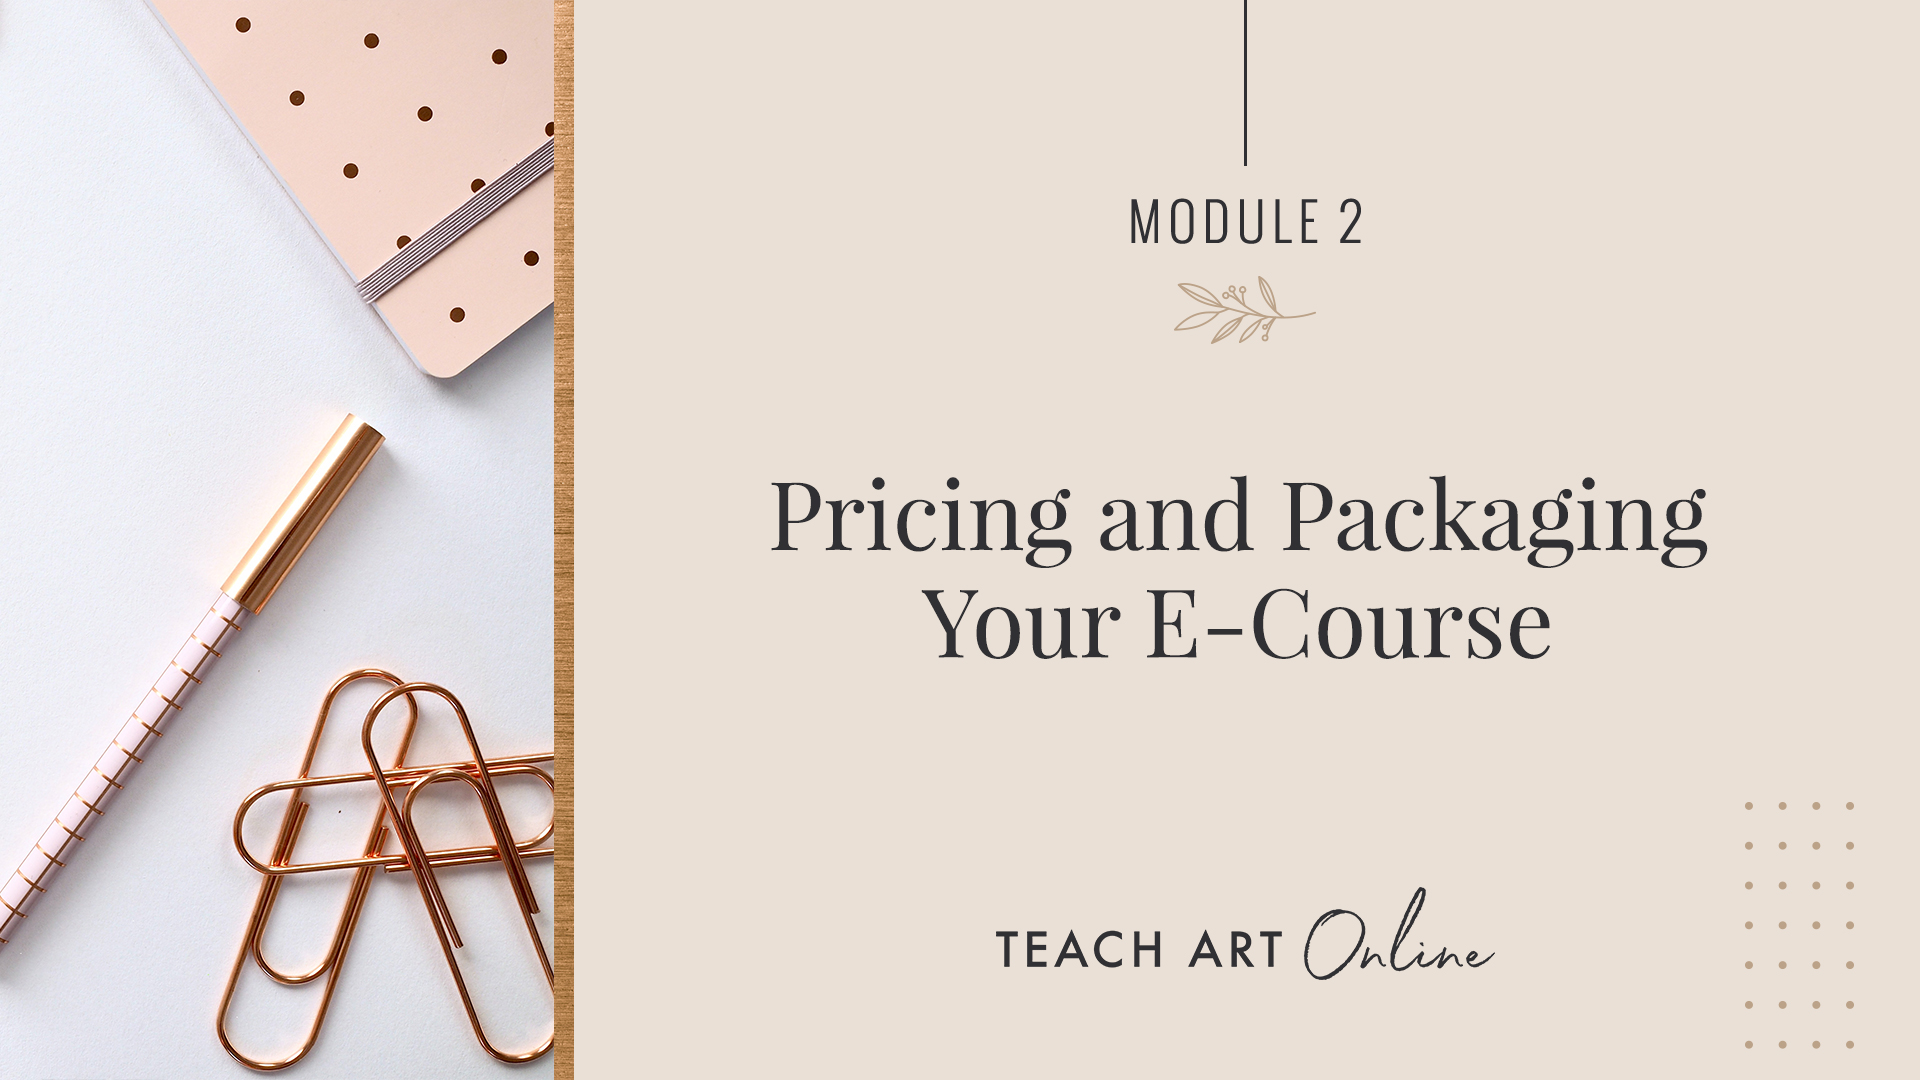 TAO_VPricing-and-Packaging-Your-E-Course.jpg